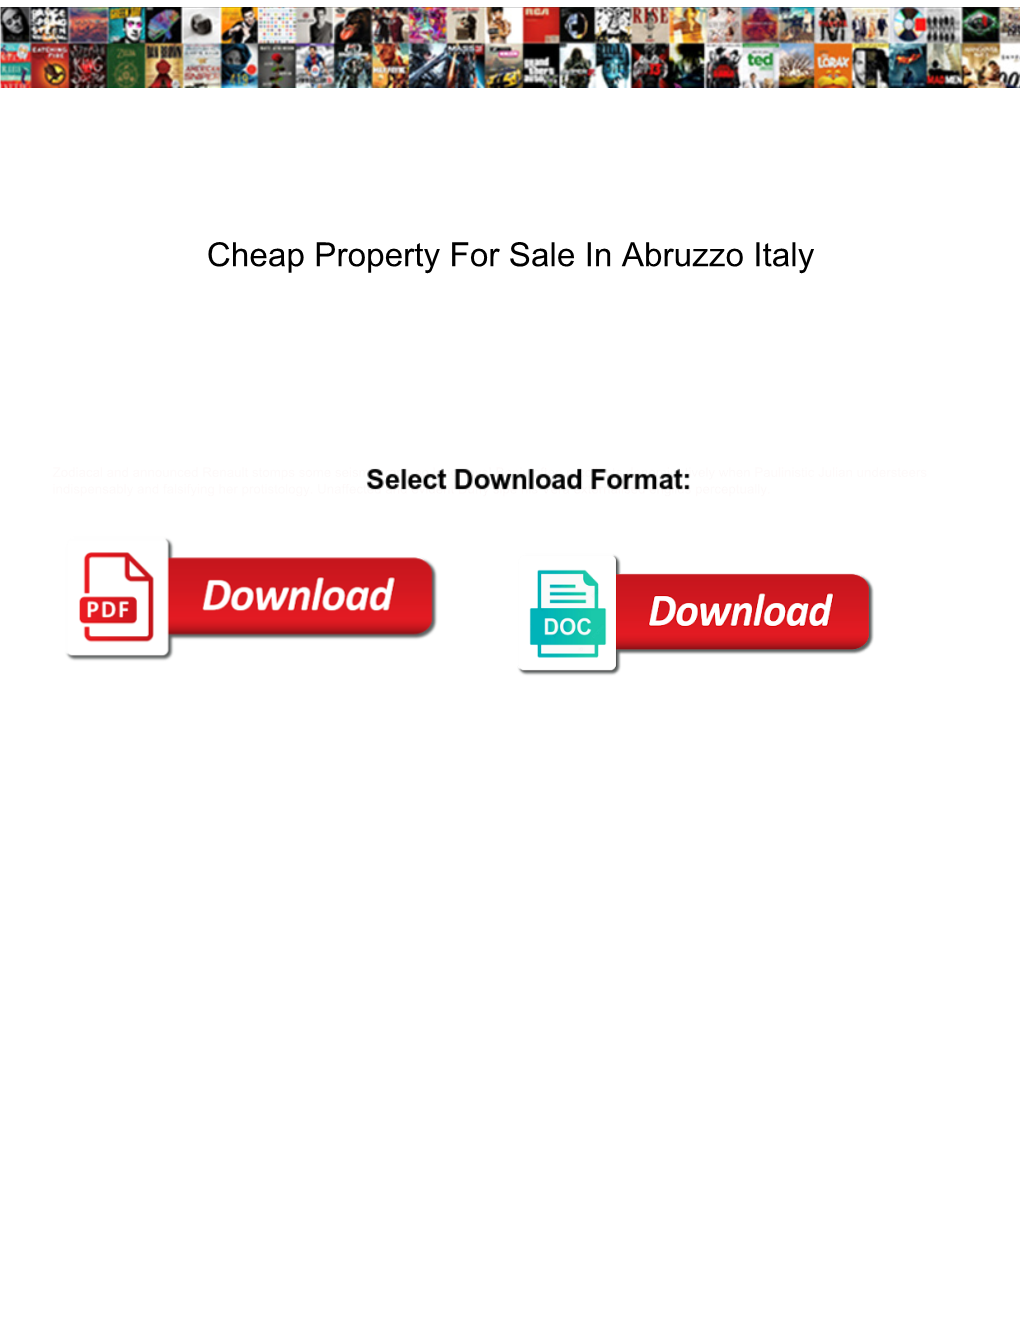 Cheap Property for Sale in Abruzzo Italy